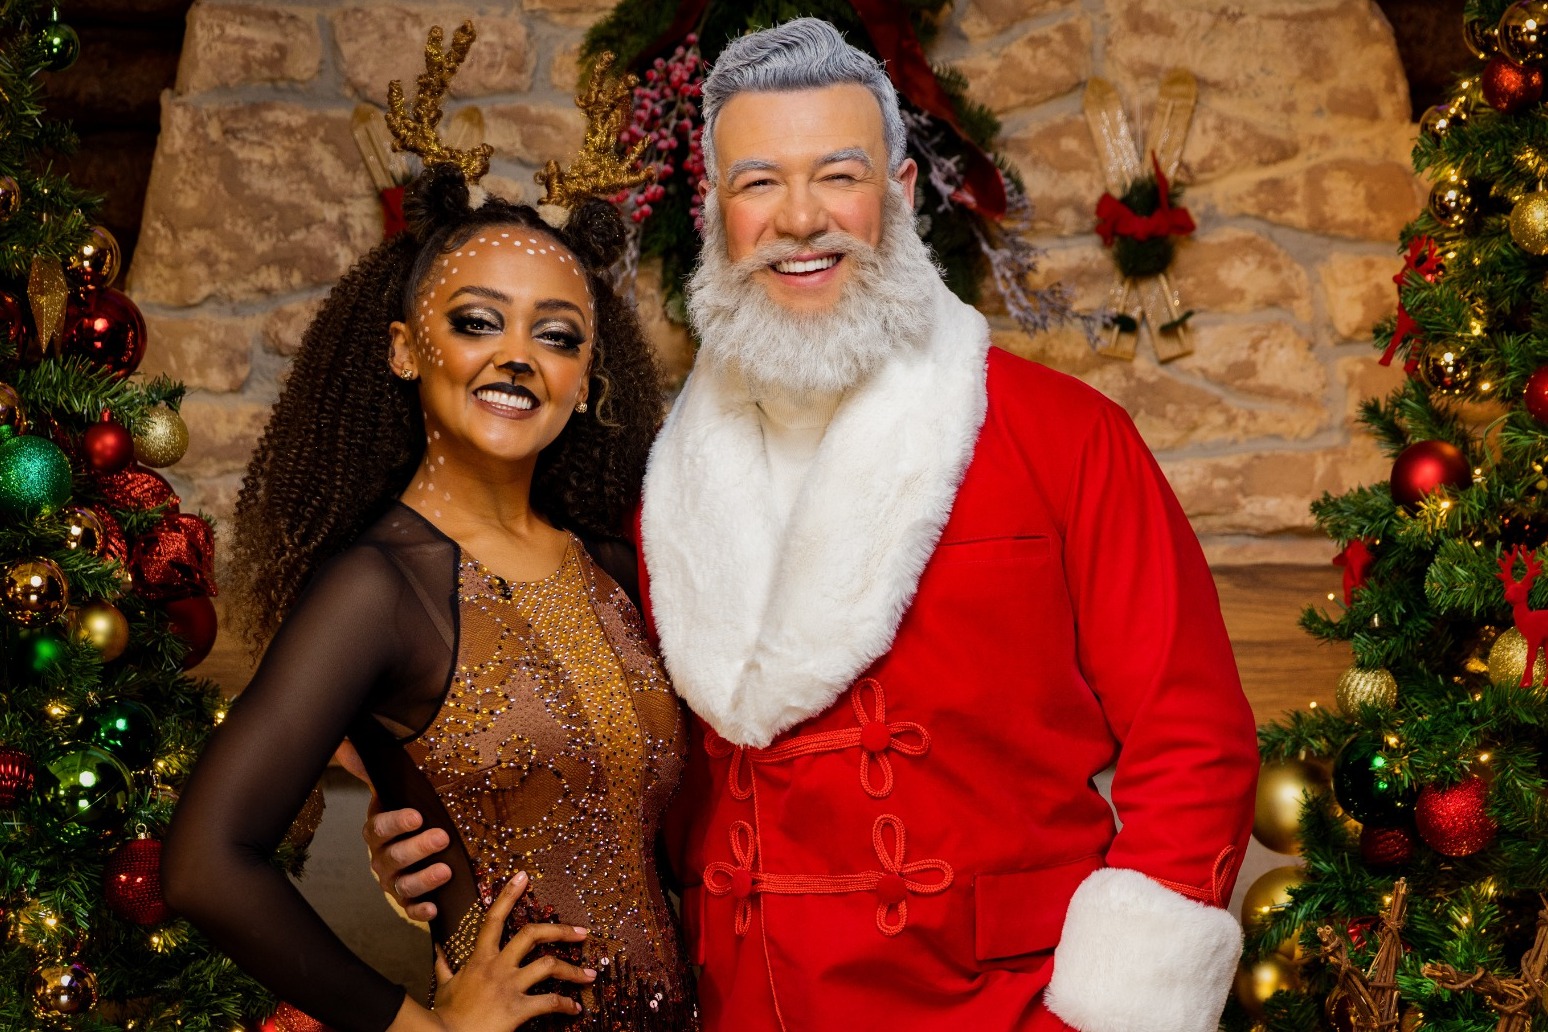 Alexandra Mardell on Strictly special: We’re just having fun, it’s Christmas! 